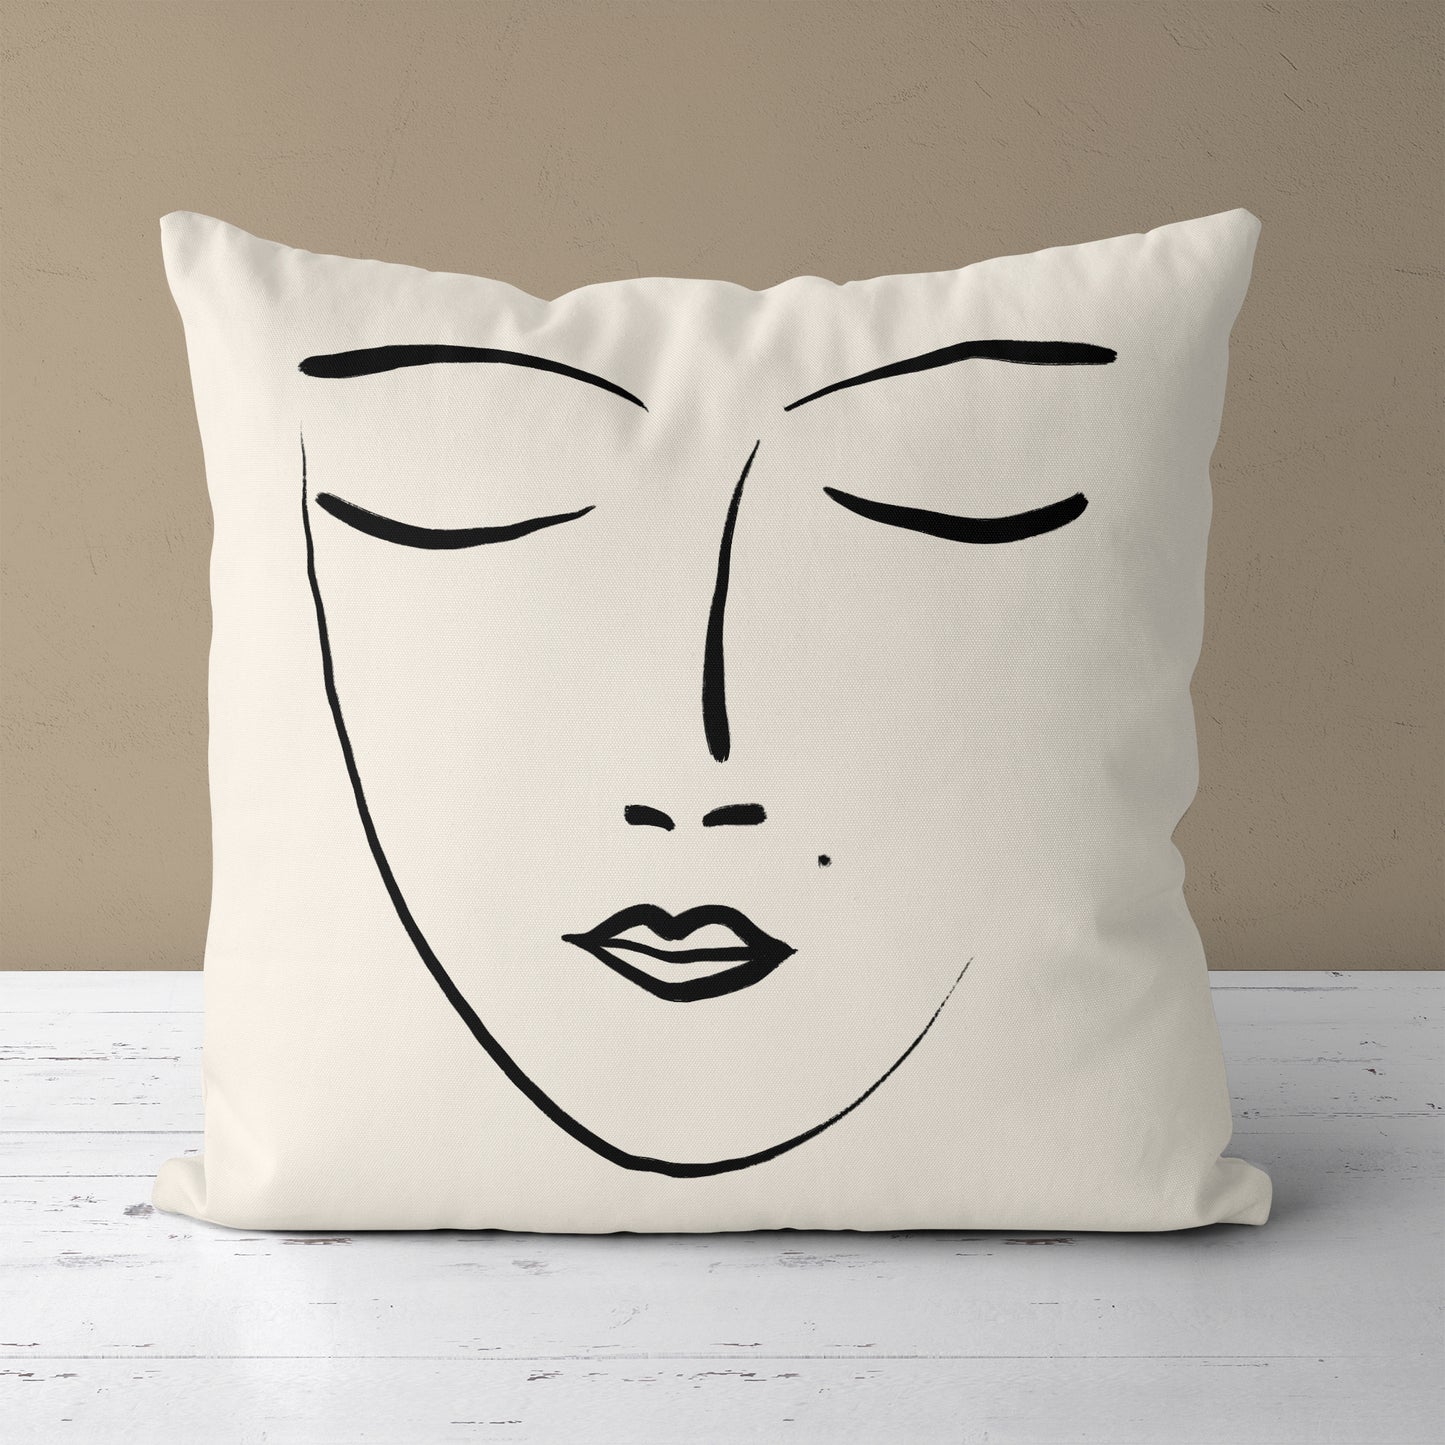 Rustic Throw Pillow with Woman